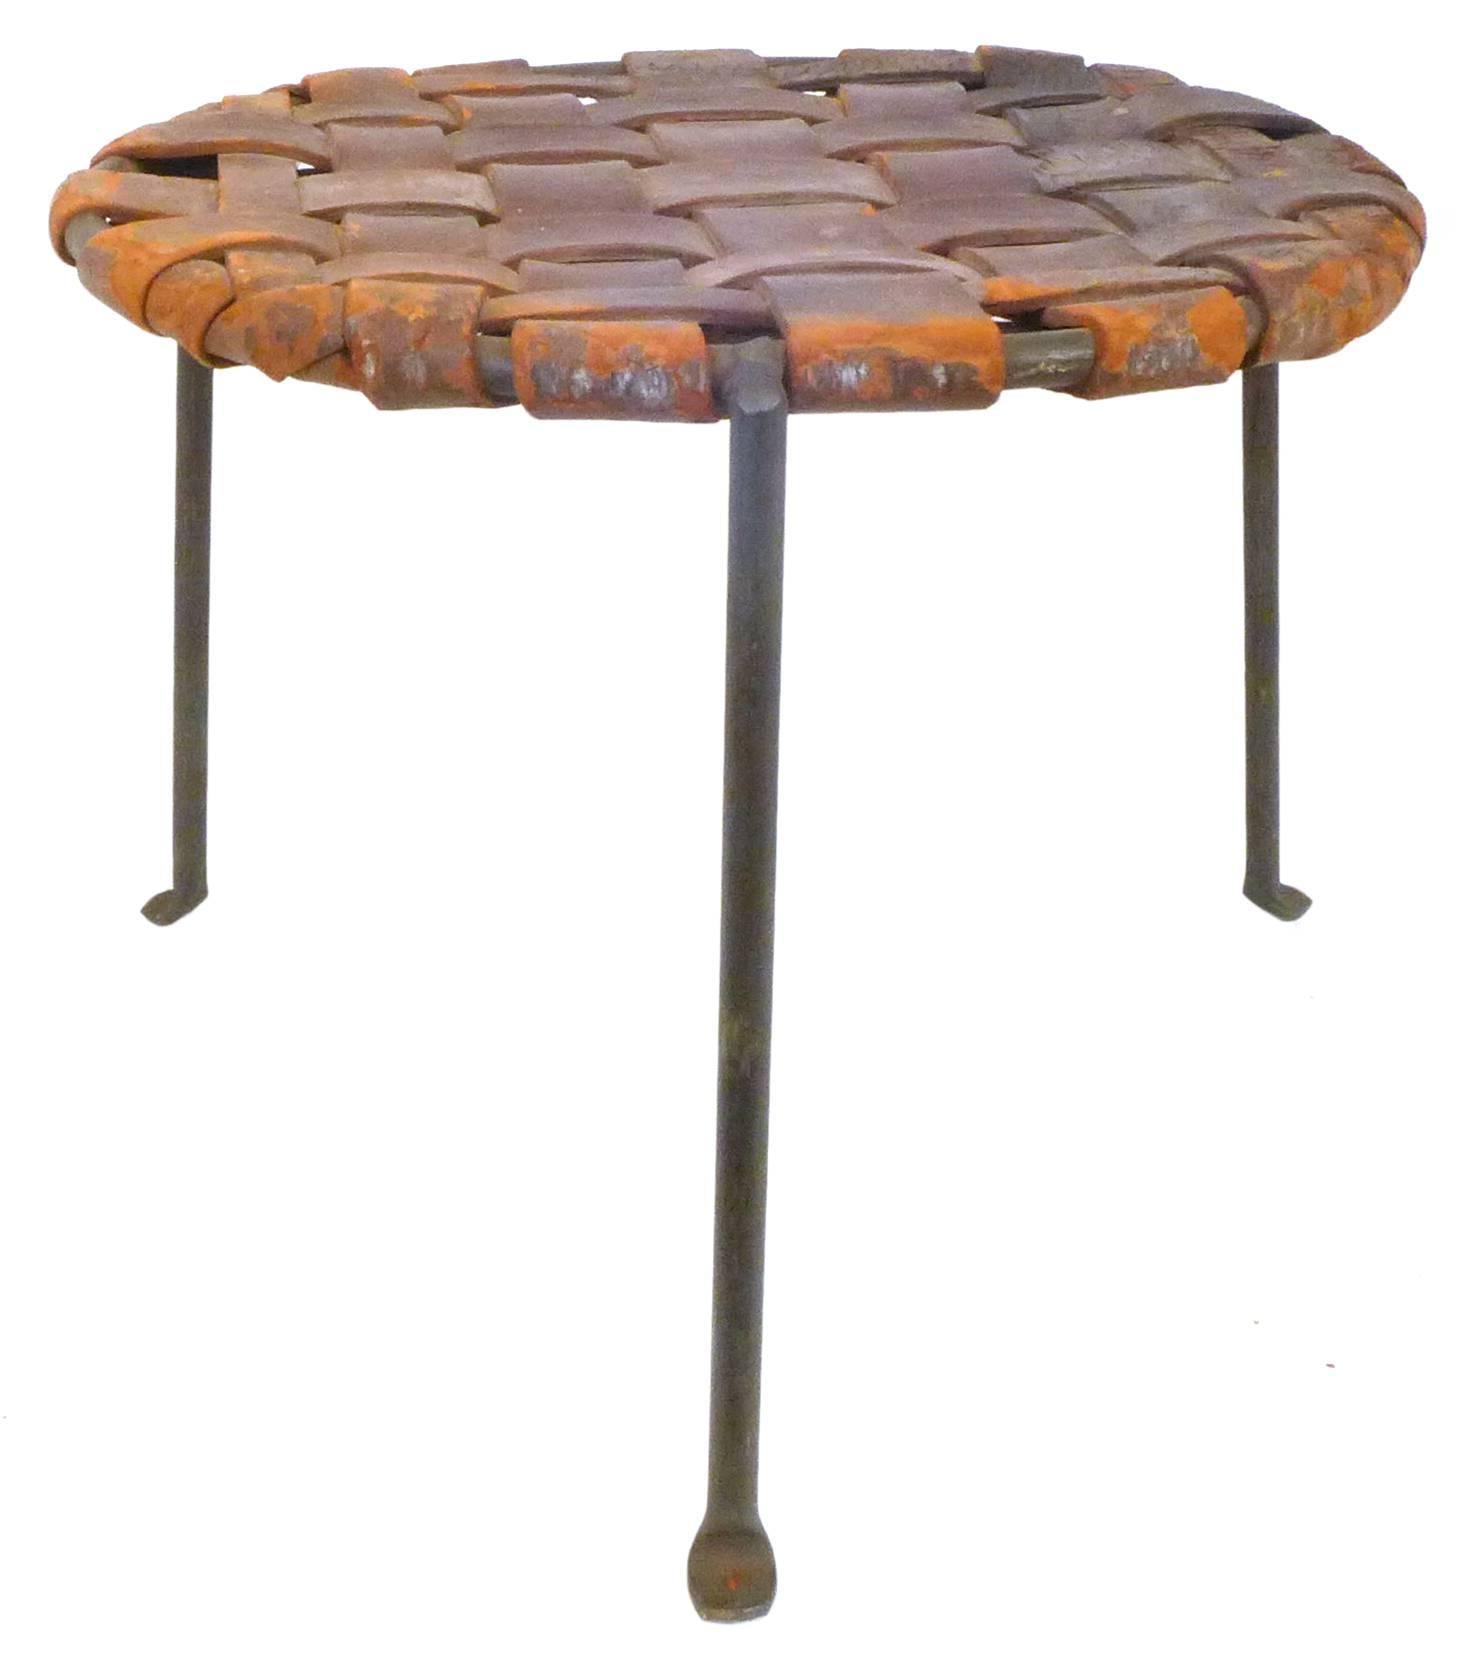 A handsome pair of wrought iron and woven leather stools by Lila Swift & Donald Monell. Beautifully simple, three-legged constructions with great, contrasting patinas; thick leather straps of assorted widths woven and tied underneath in an alluring,